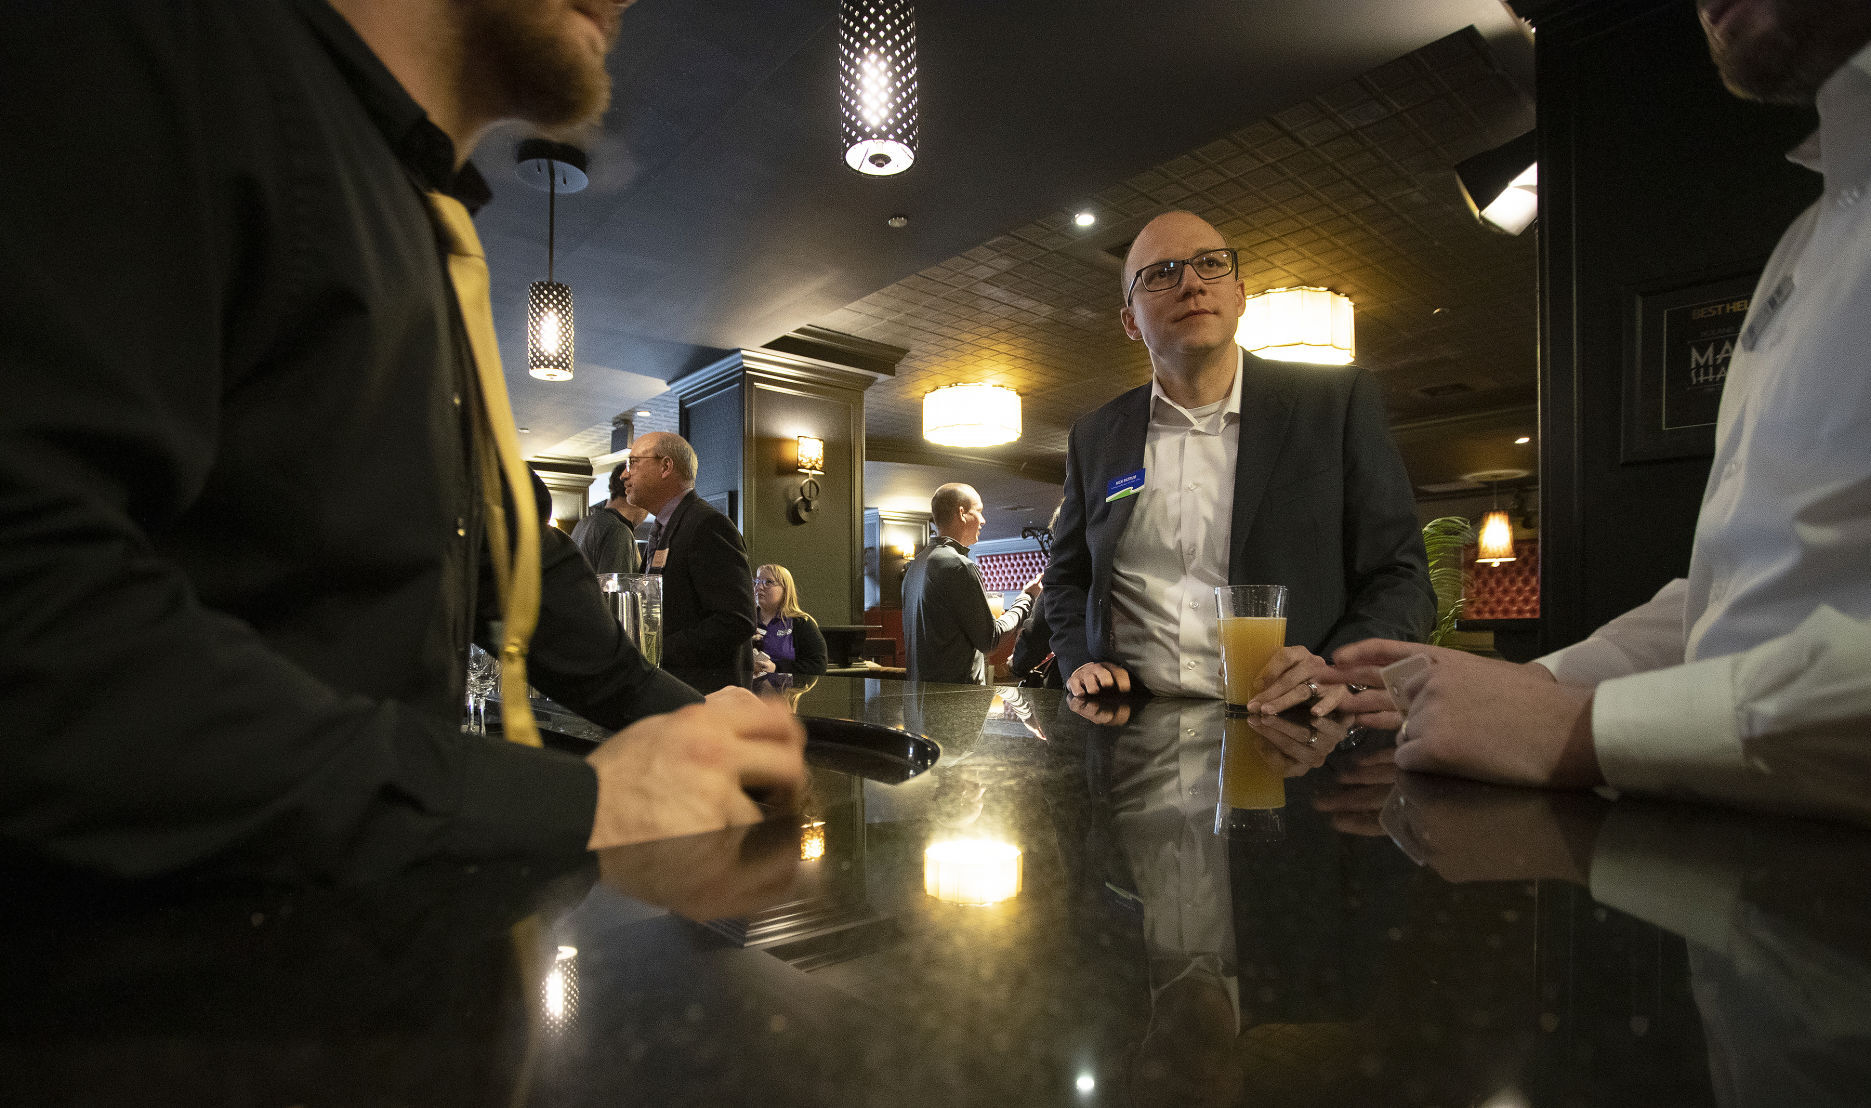 Nick Patrum, vice president, commercial banker team lead for Dubuque Bank & Trust, chats with others at the Executive Meet and Greet in the Riverboat Lounge at Hotel Julien Dubuque on Tuesday, April. 19, 2022.    PHOTO CREDIT: Stephen Gassman